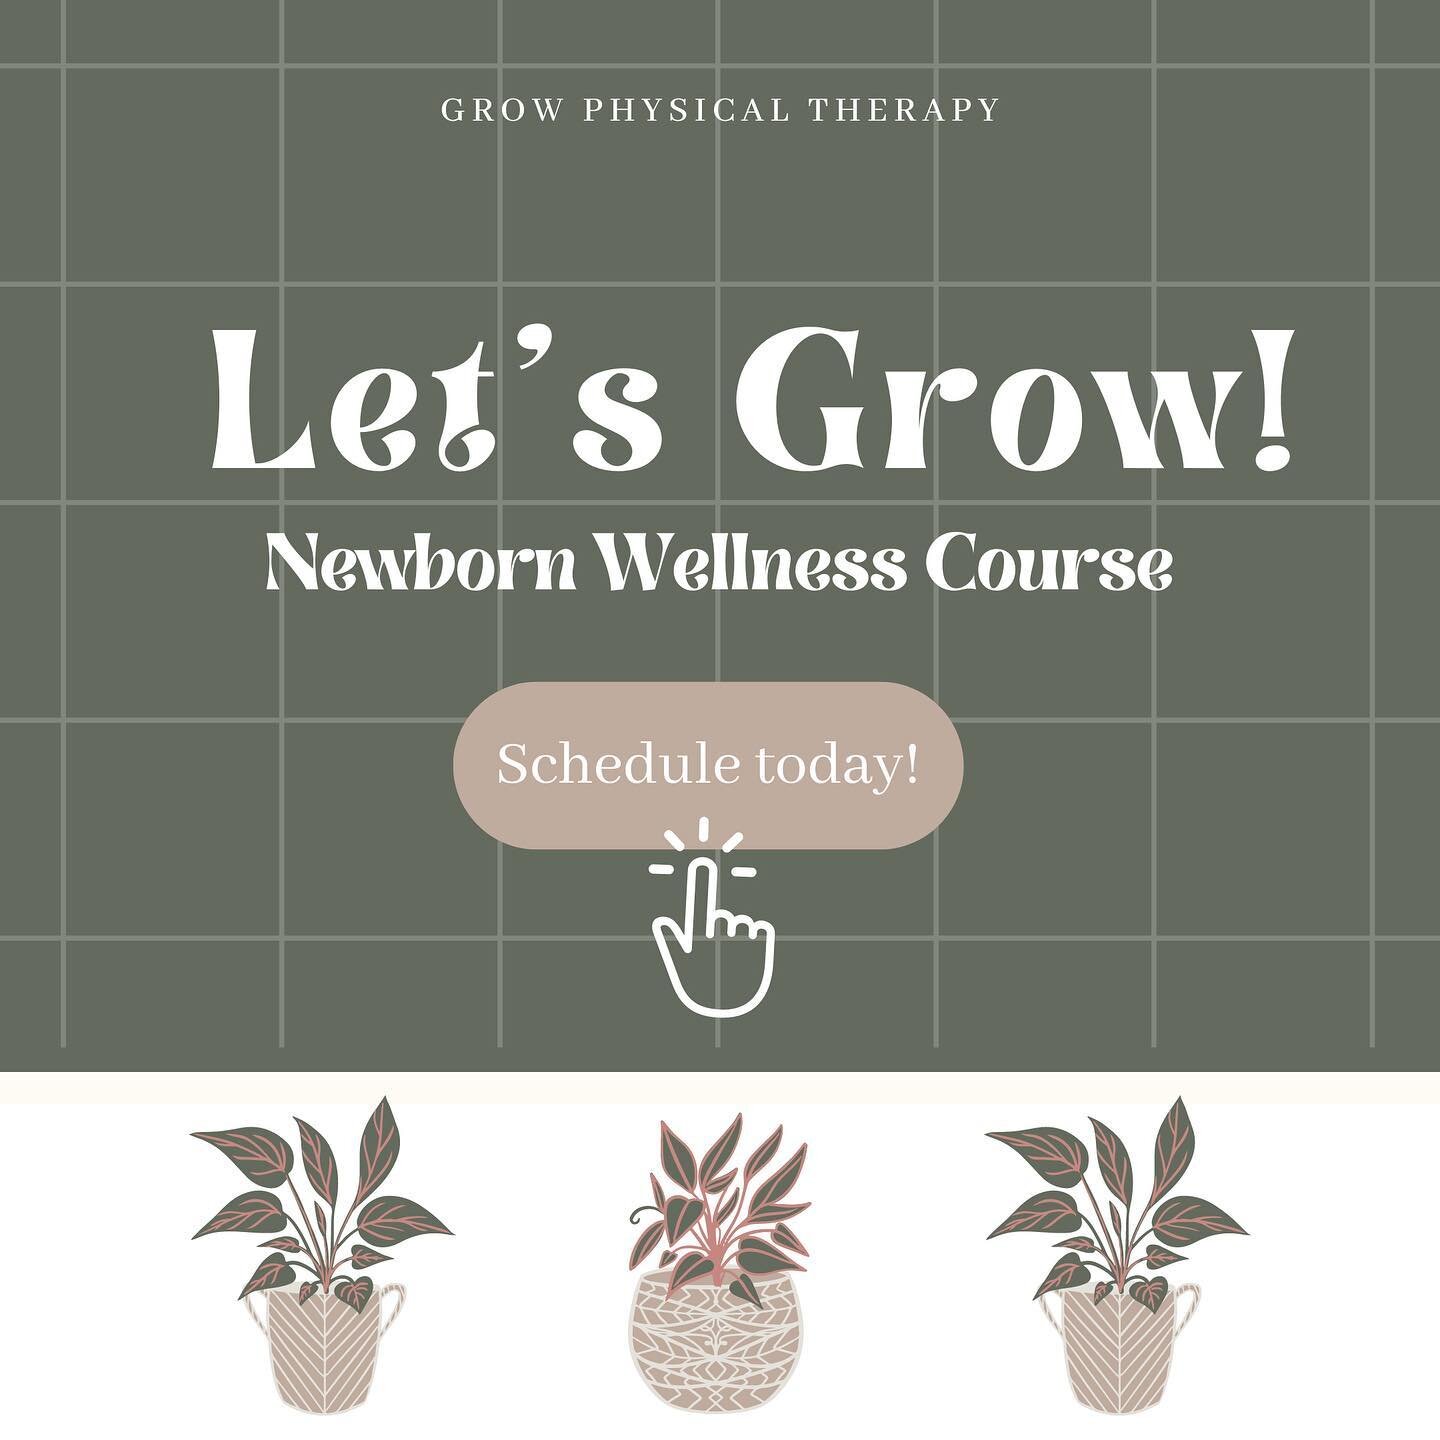 So happy to announce my newborn wellness course &ldquo;Let&rsquo;s Grow&rdquo; is now available for you to book through my website! The topics include:

+ gross motor milestones
+ prevention and education of torticollis and plagiocephaly 
+ tummy tim